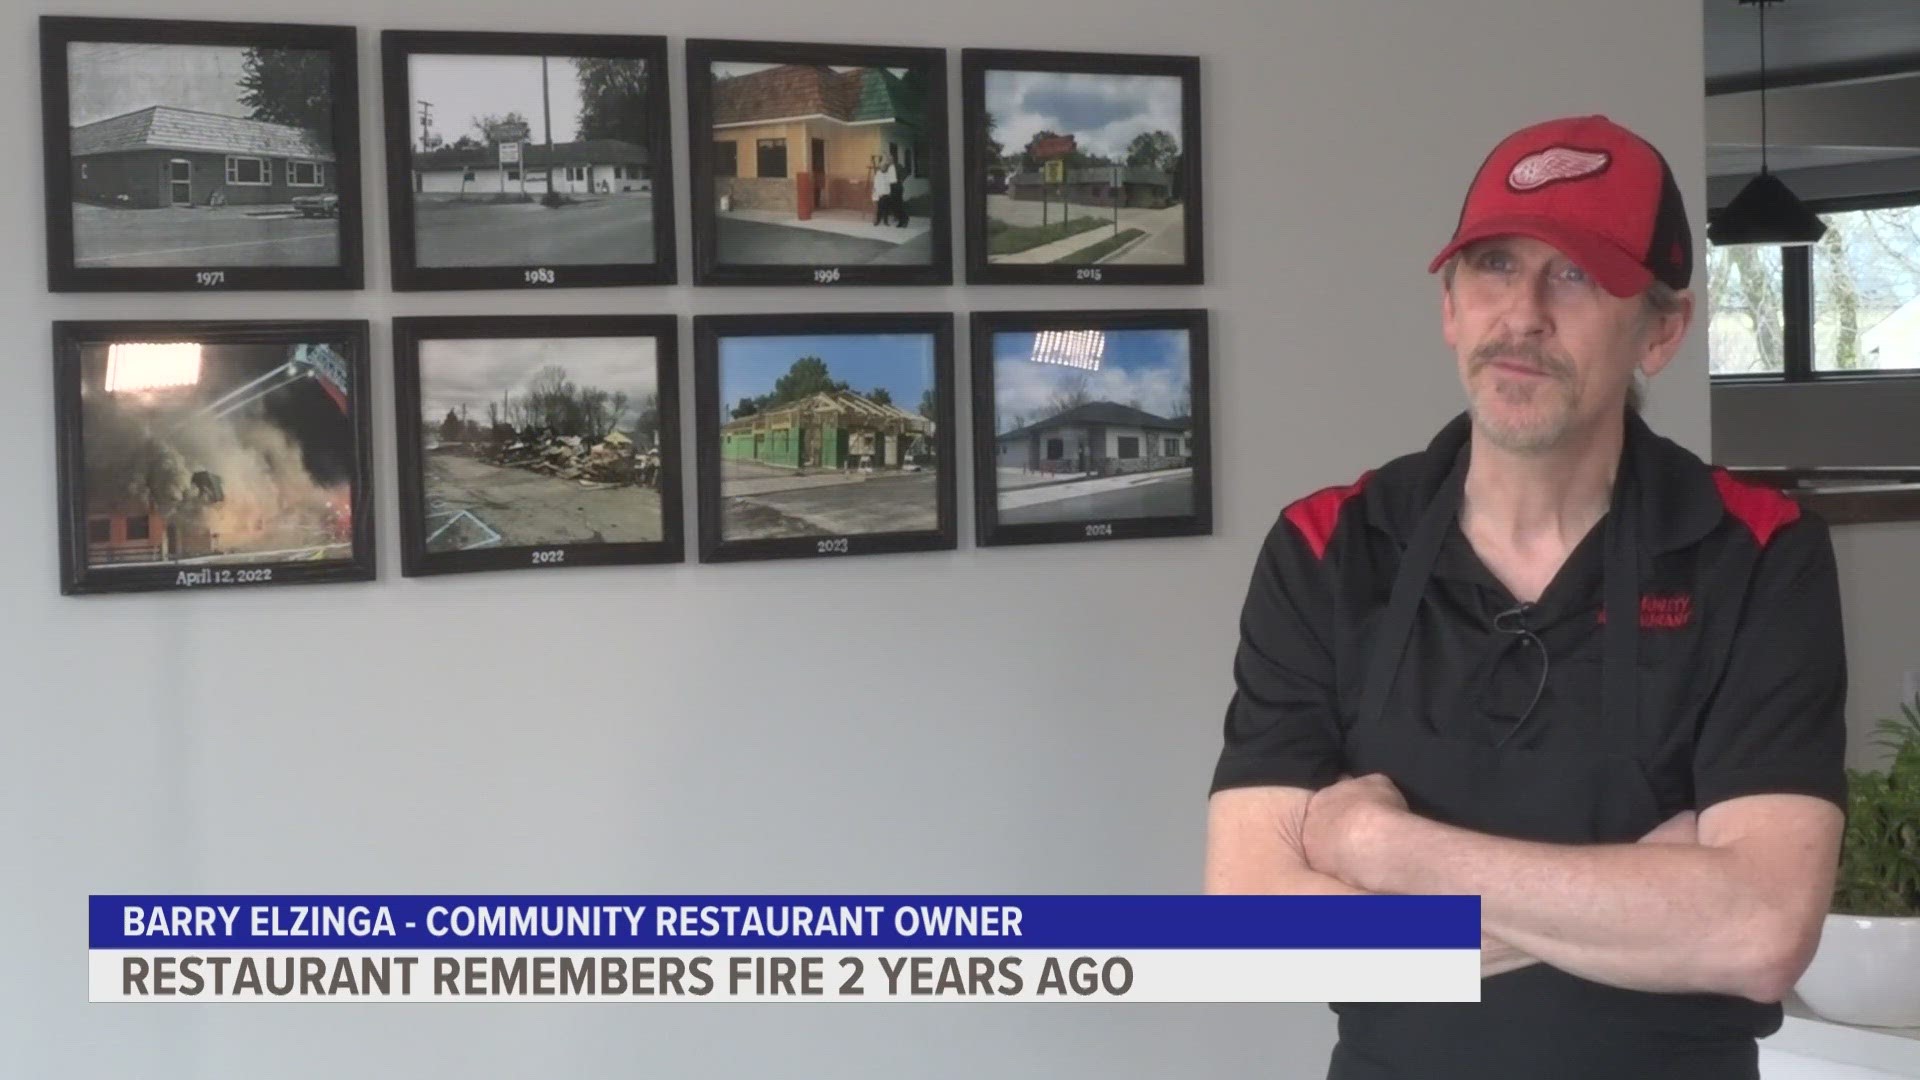 The fire broke out at the Community Restaurant in downtown Zeeland in April of 2022, but the owner is glad to be back.